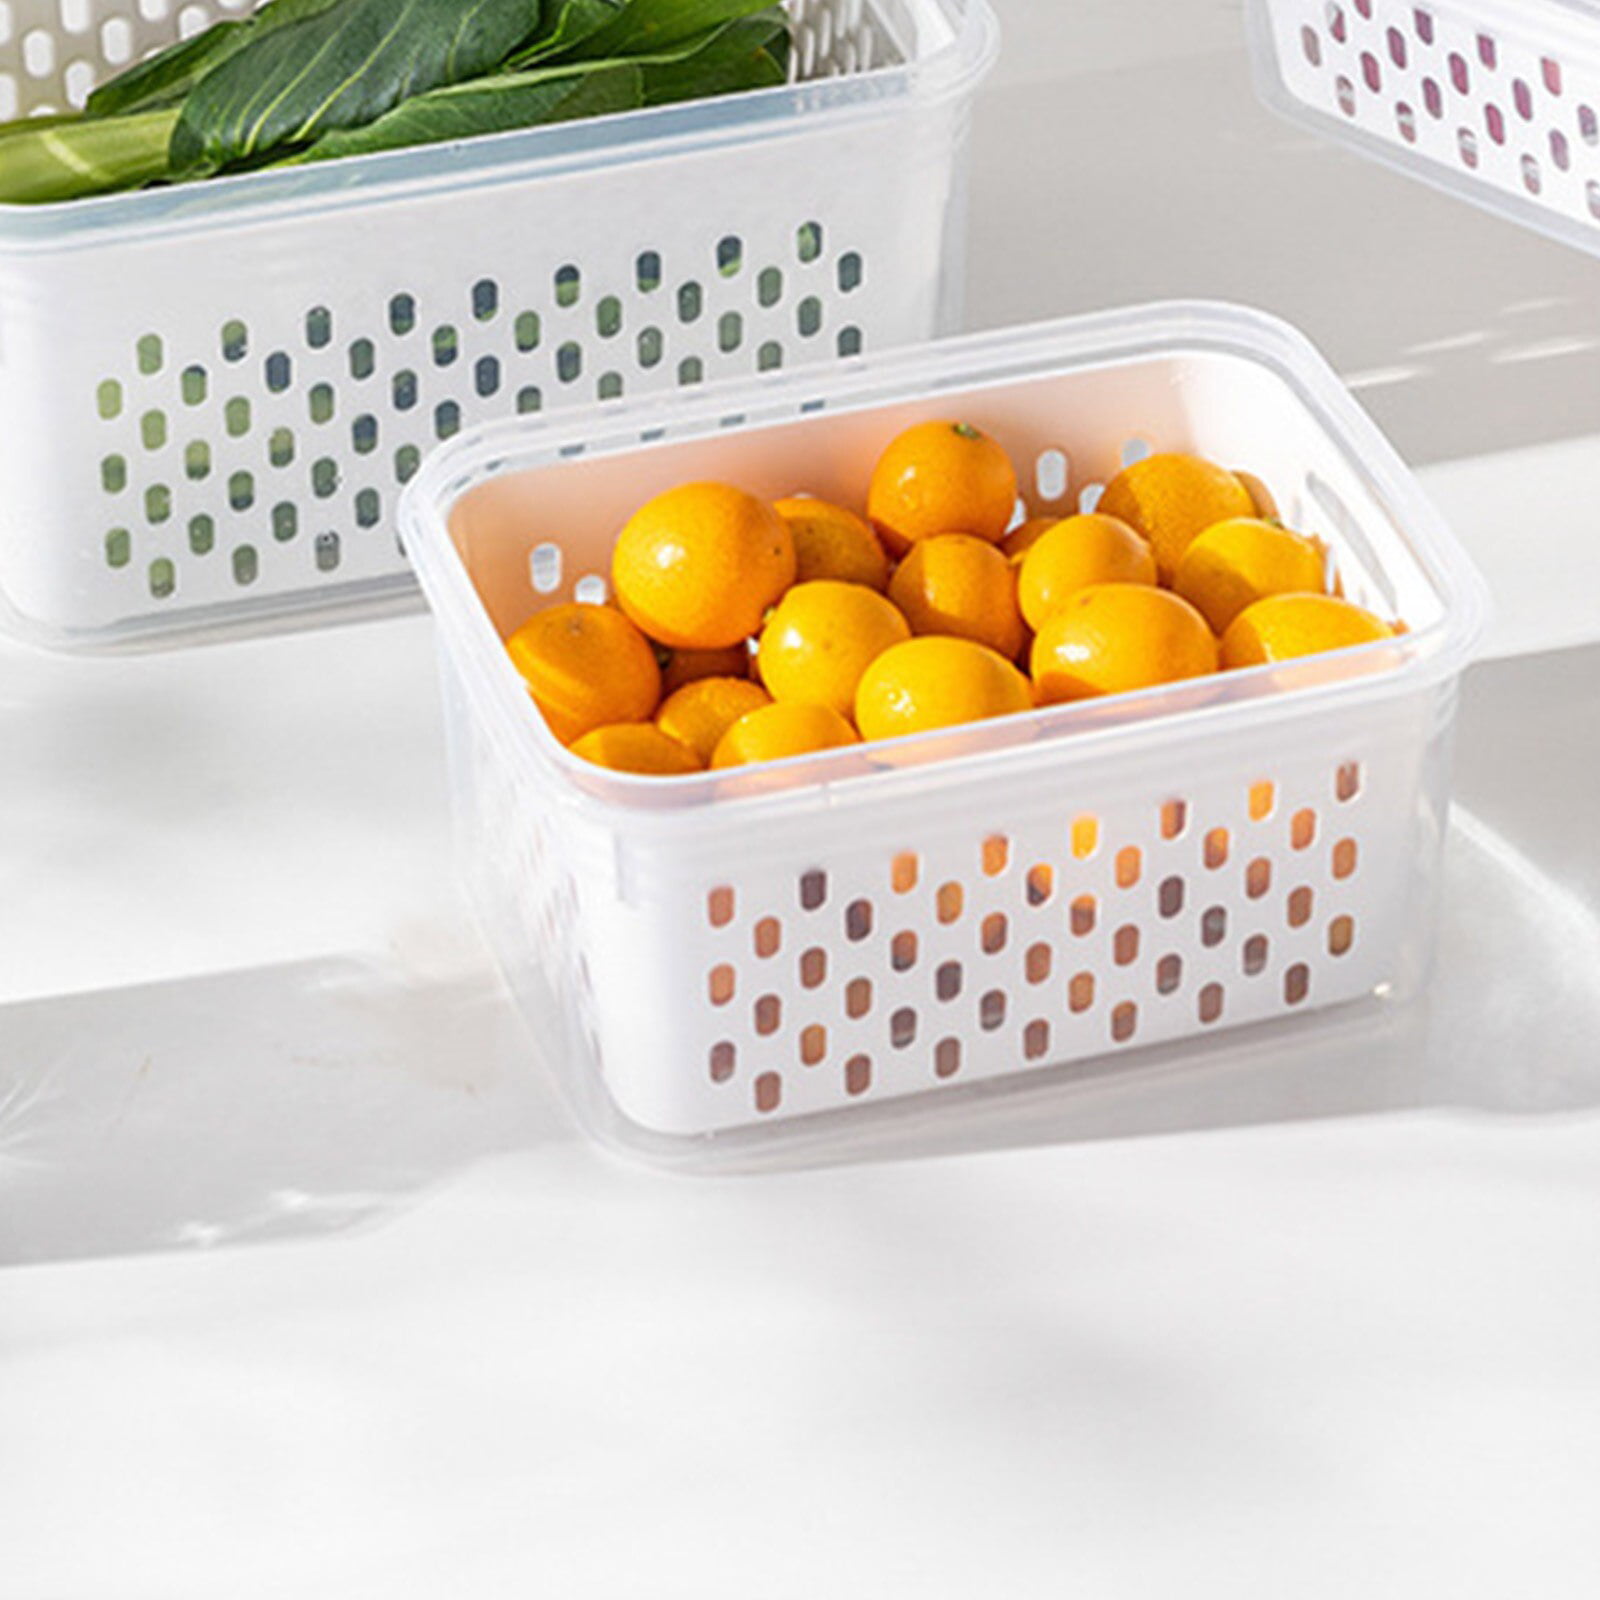 MsPrLs Fruit Storage Containers for Fridge 5 Pack | Fruits and Veggie  Containers for Refrigerator with Colander | Keep Produce Vegetables Lettuce